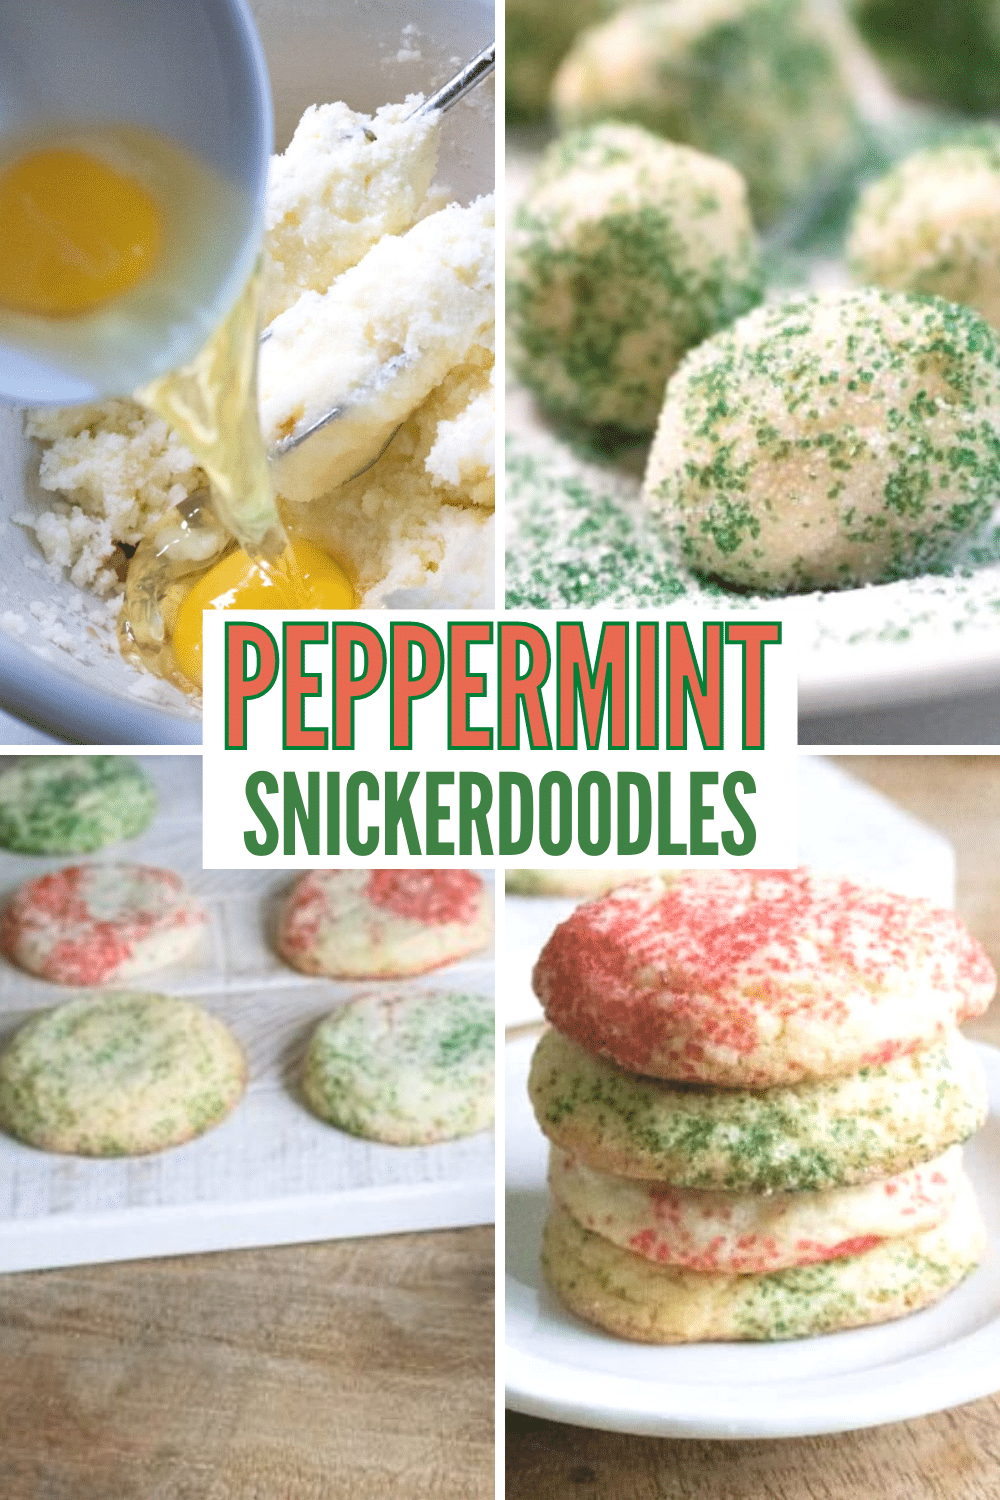 Peppermint snickerdoodles are a delightful holiday treat that combines the classic flavors of snickerdoodle cookies with a refreshing twist of peppermint. This easy-to-follow recipe will guide you through